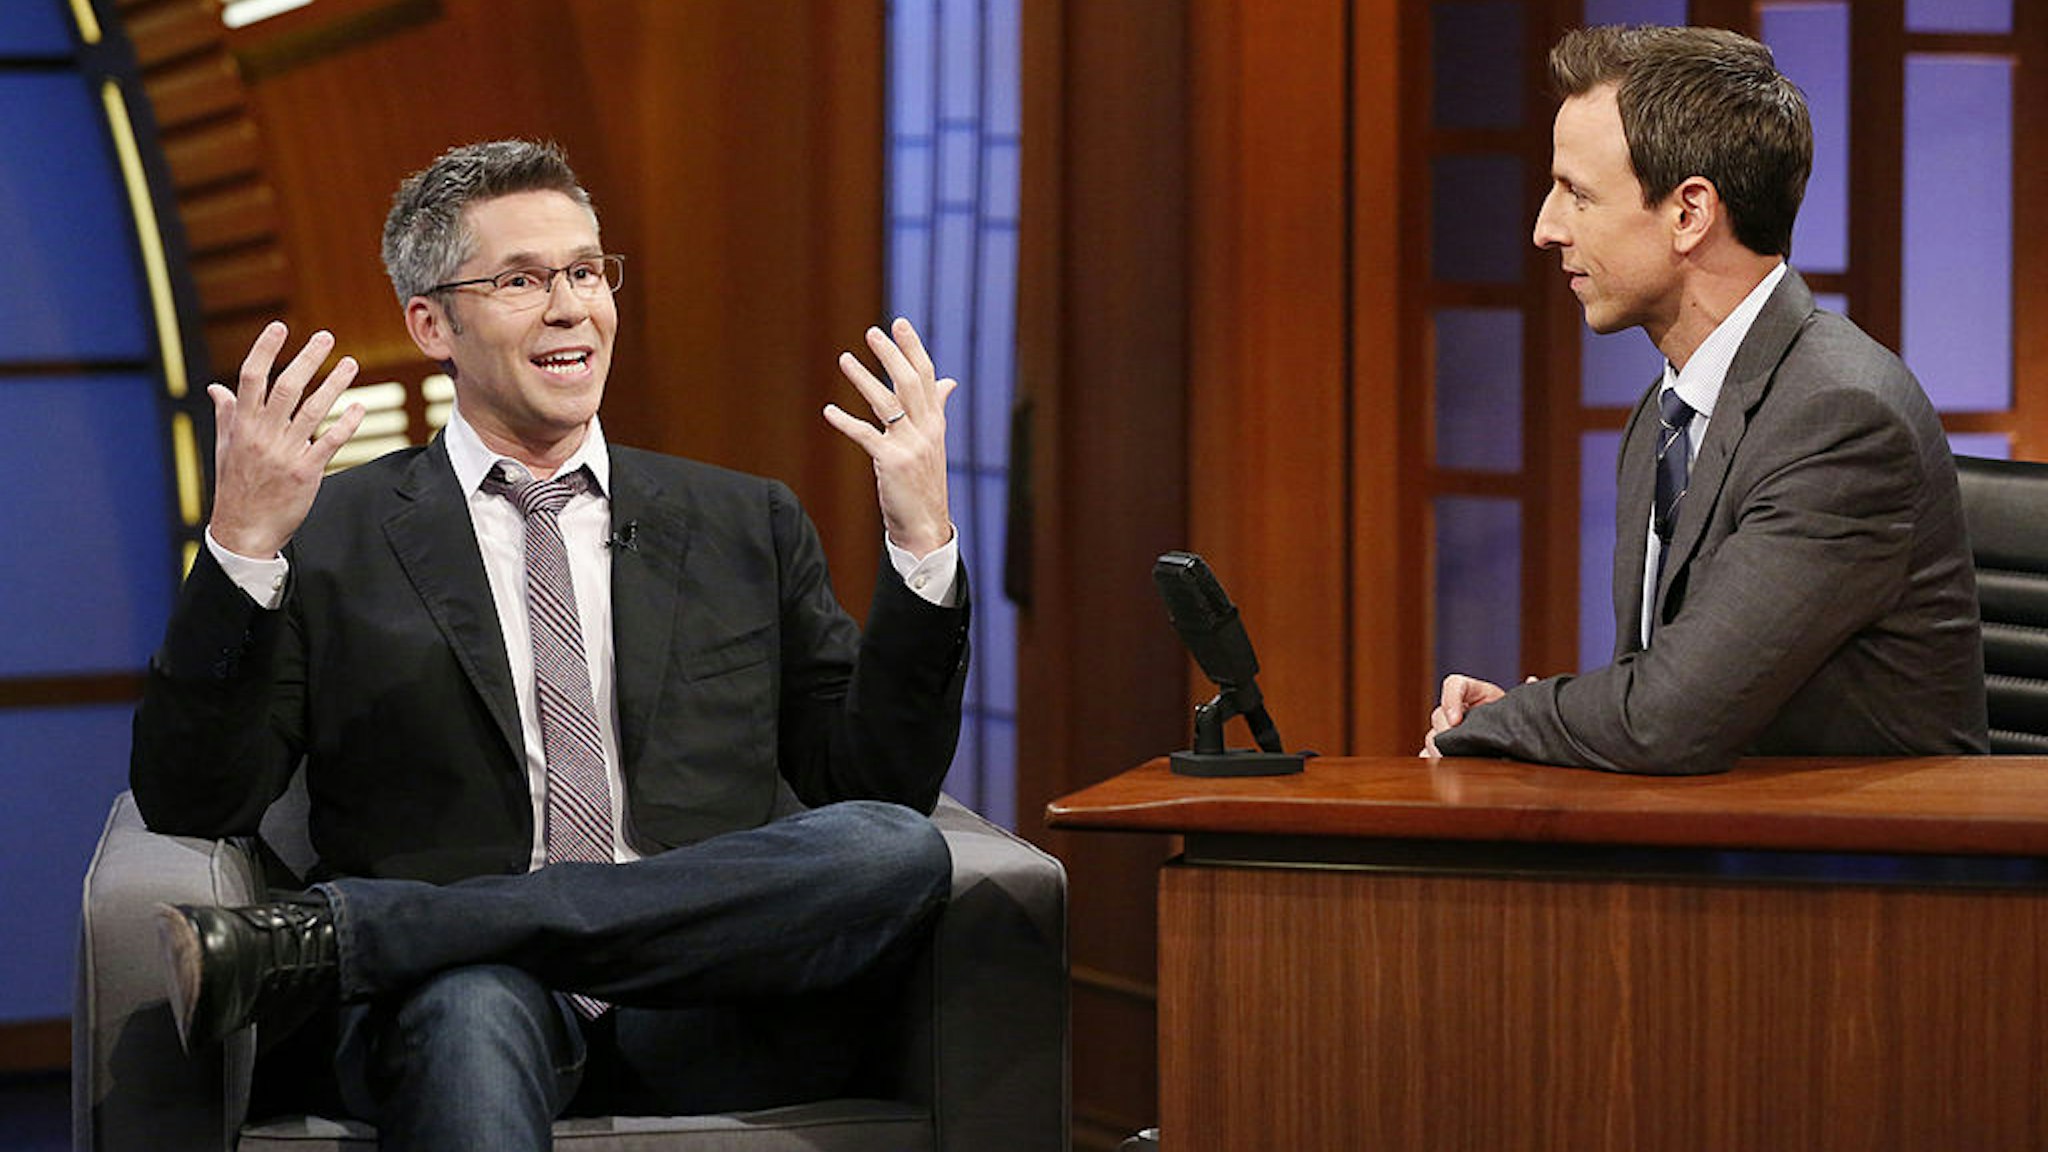 Comedian John Henson during an interview with host Seth Meyers on July 16, 2014